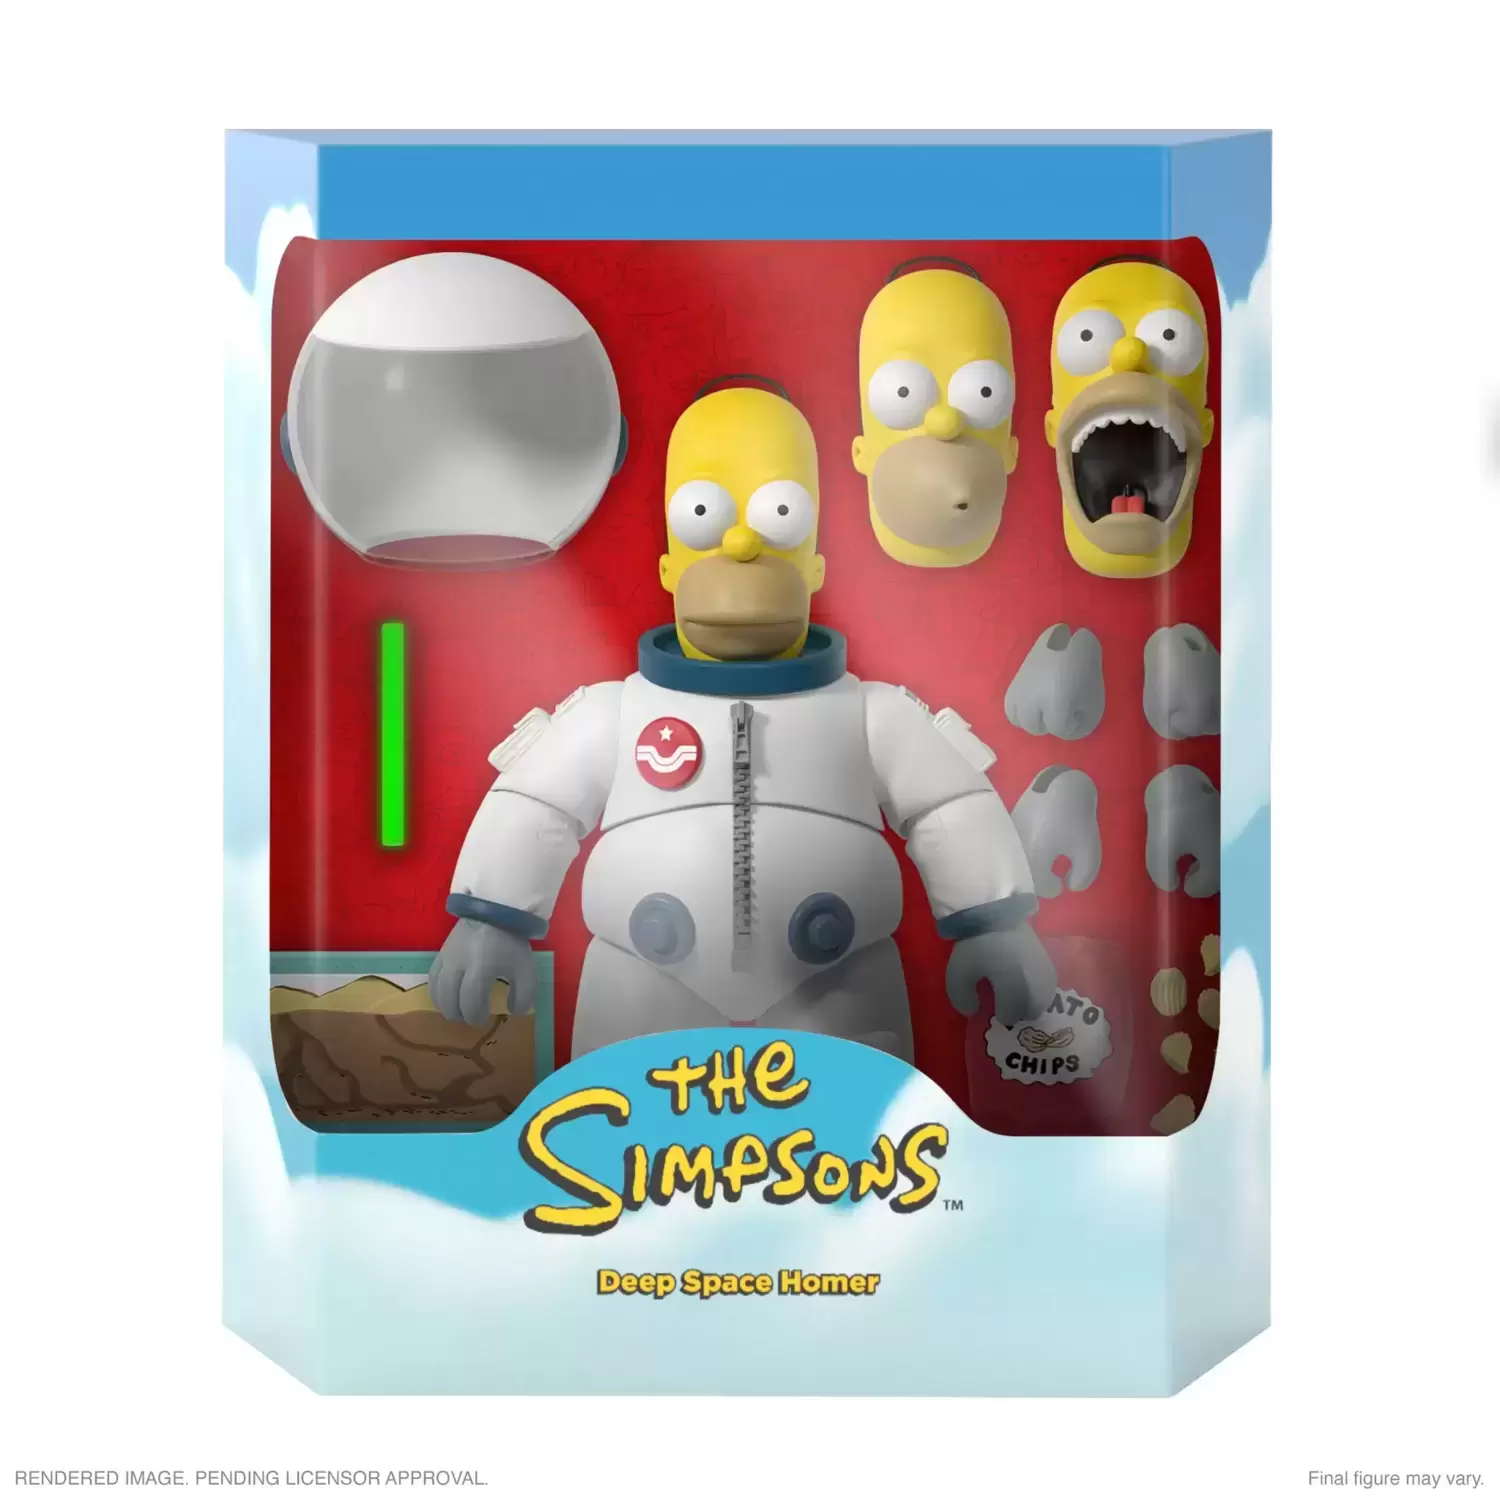 Super7 - ULTIMATES! - The Simpsons - Deep Space Homer